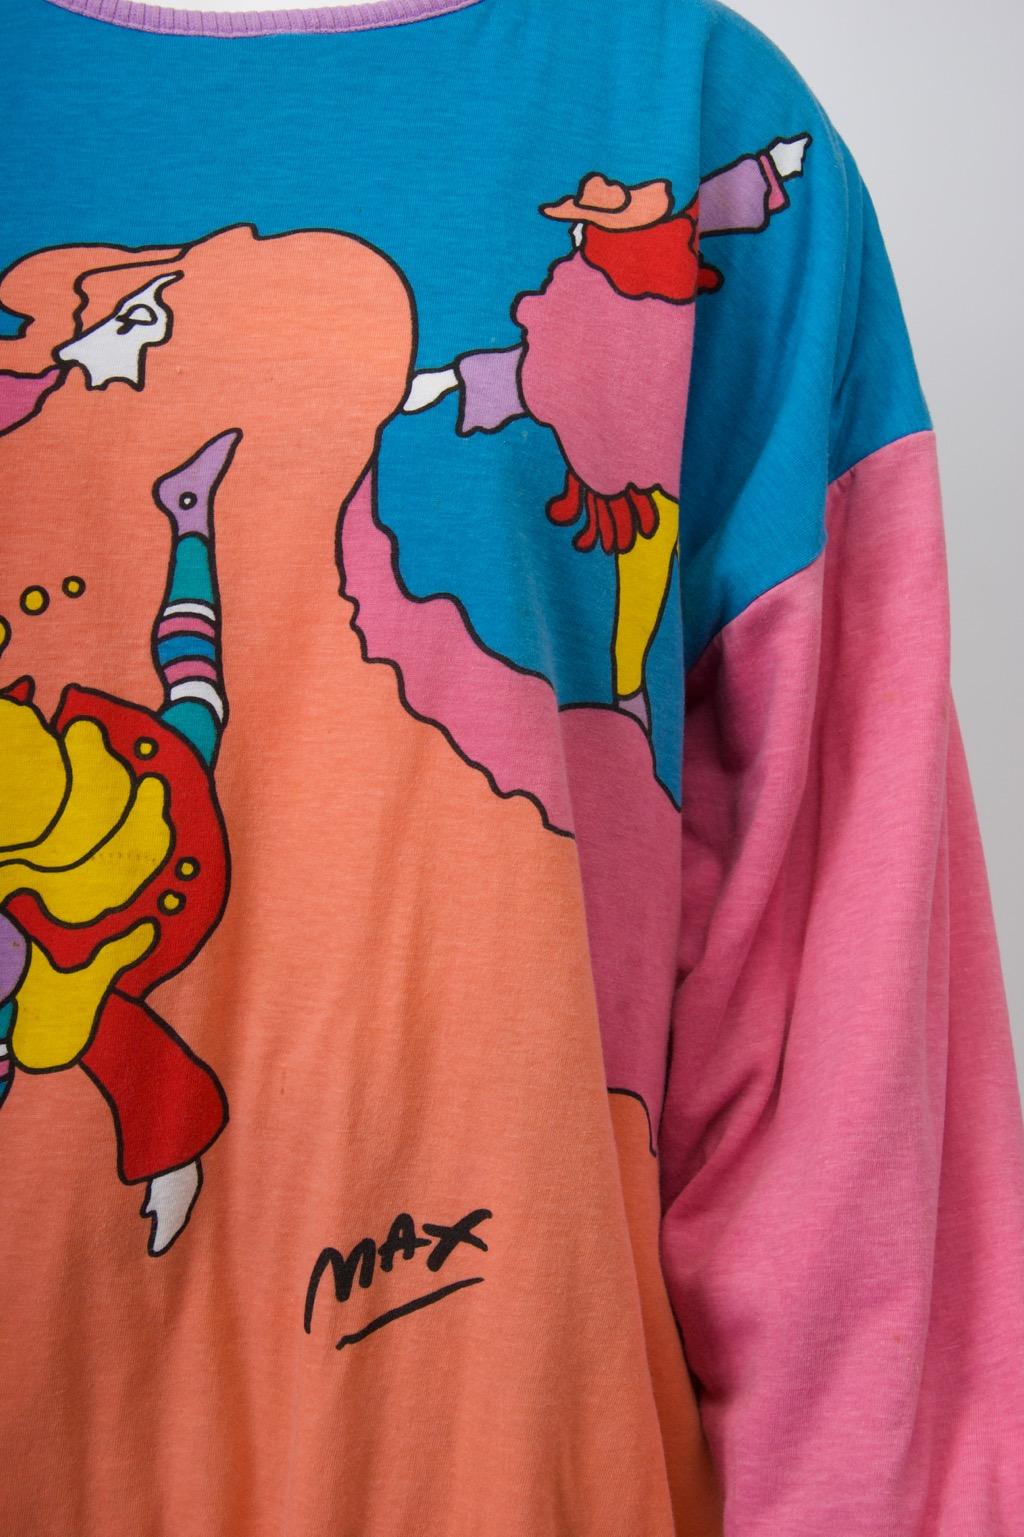 Peter Max sweatshirt made in 1989 based on the artist's 1973 serigraph 